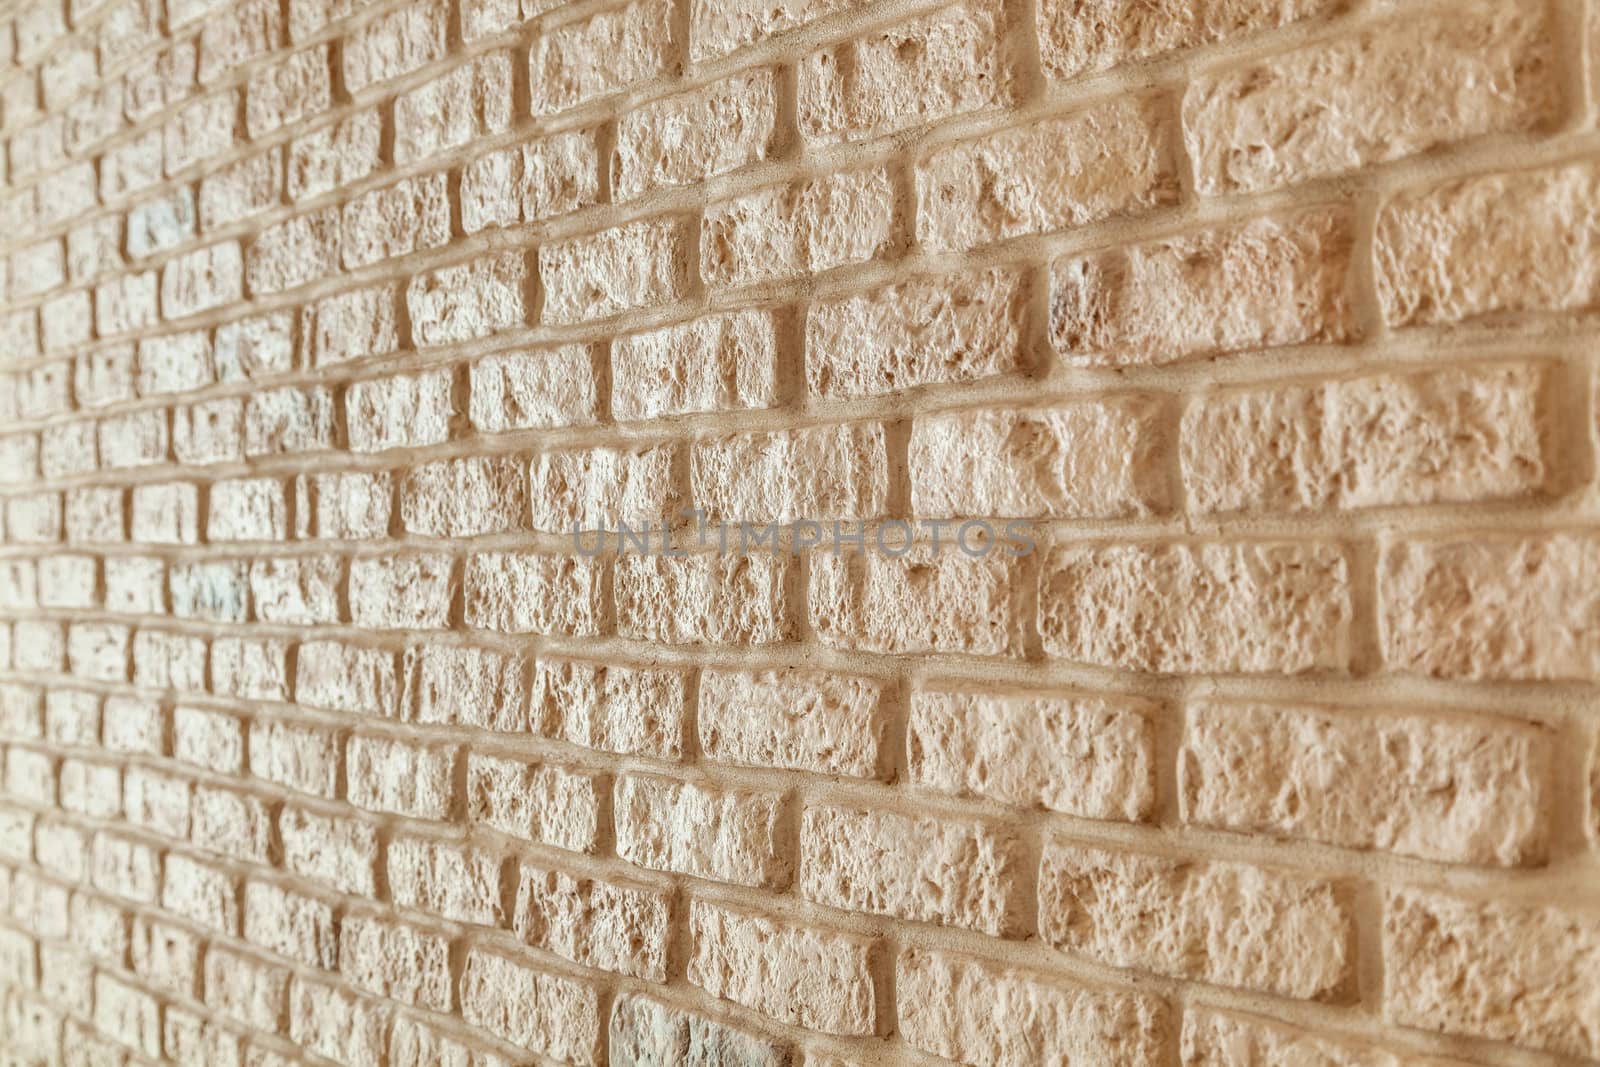 A fragment of the wall lined with white brick. Brick background.